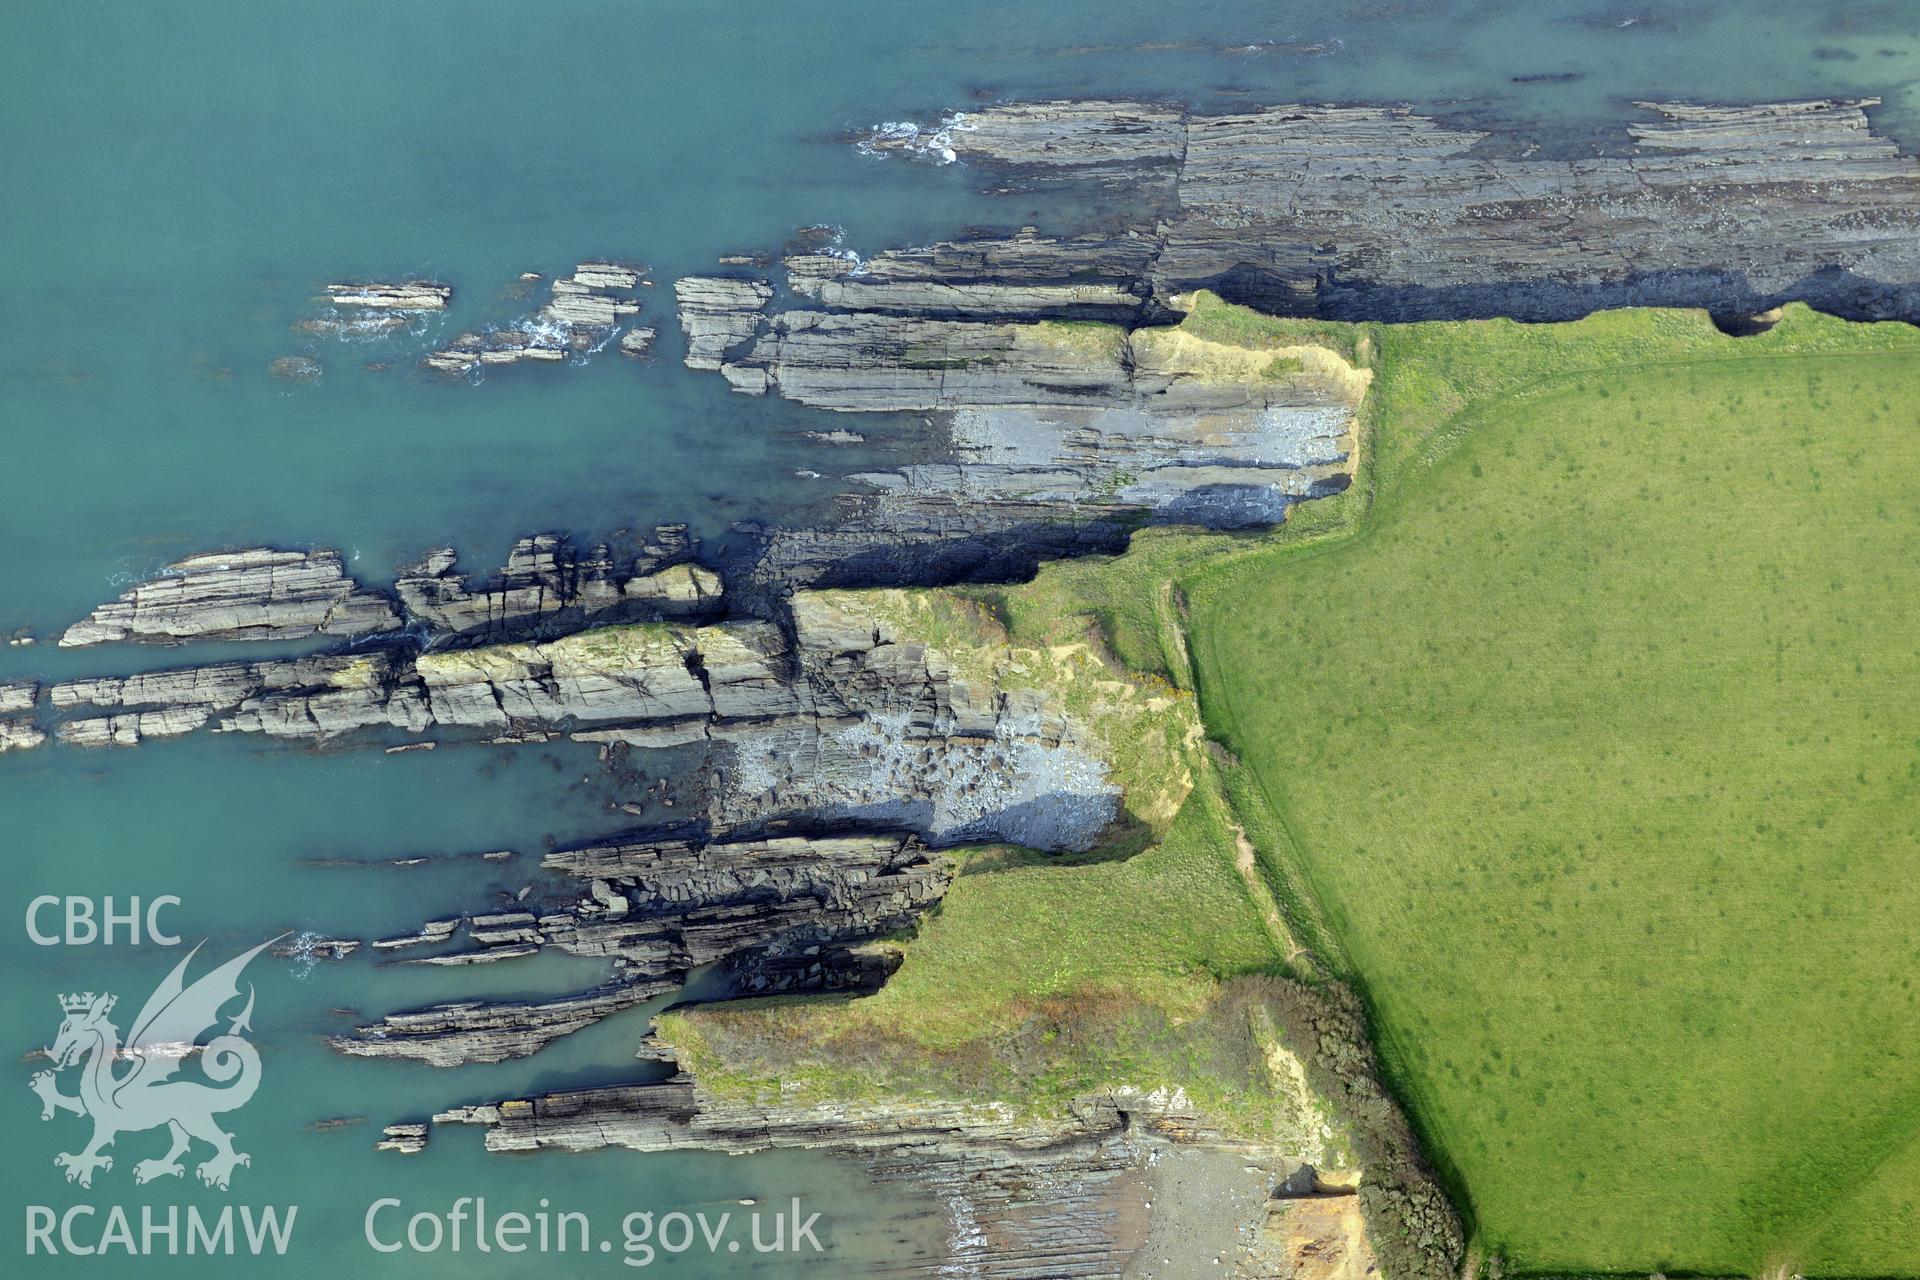 Royal Commission aerial photograph of West Angle Bay promontory fort taken on 27th March 2017. Baseline aerial reconnaissance survey for the CHERISH Project. ? Crown: CHERISH PROJECT 2017. Produced with EU funds through the Ireland Wales Co-operation Programme 2014-2020. All material made freely available through the Open Government Licence.